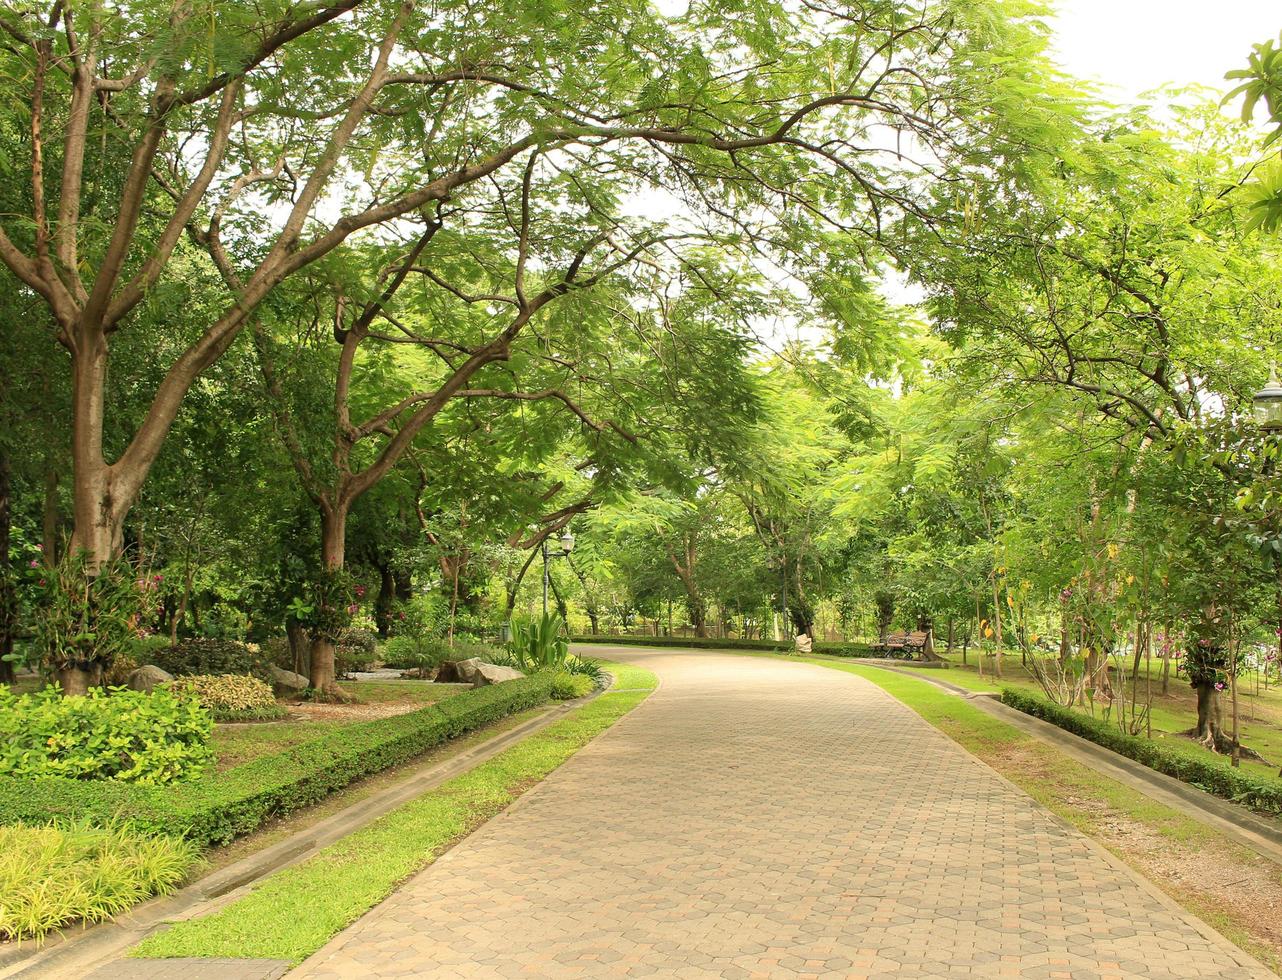 Pathway in park photo